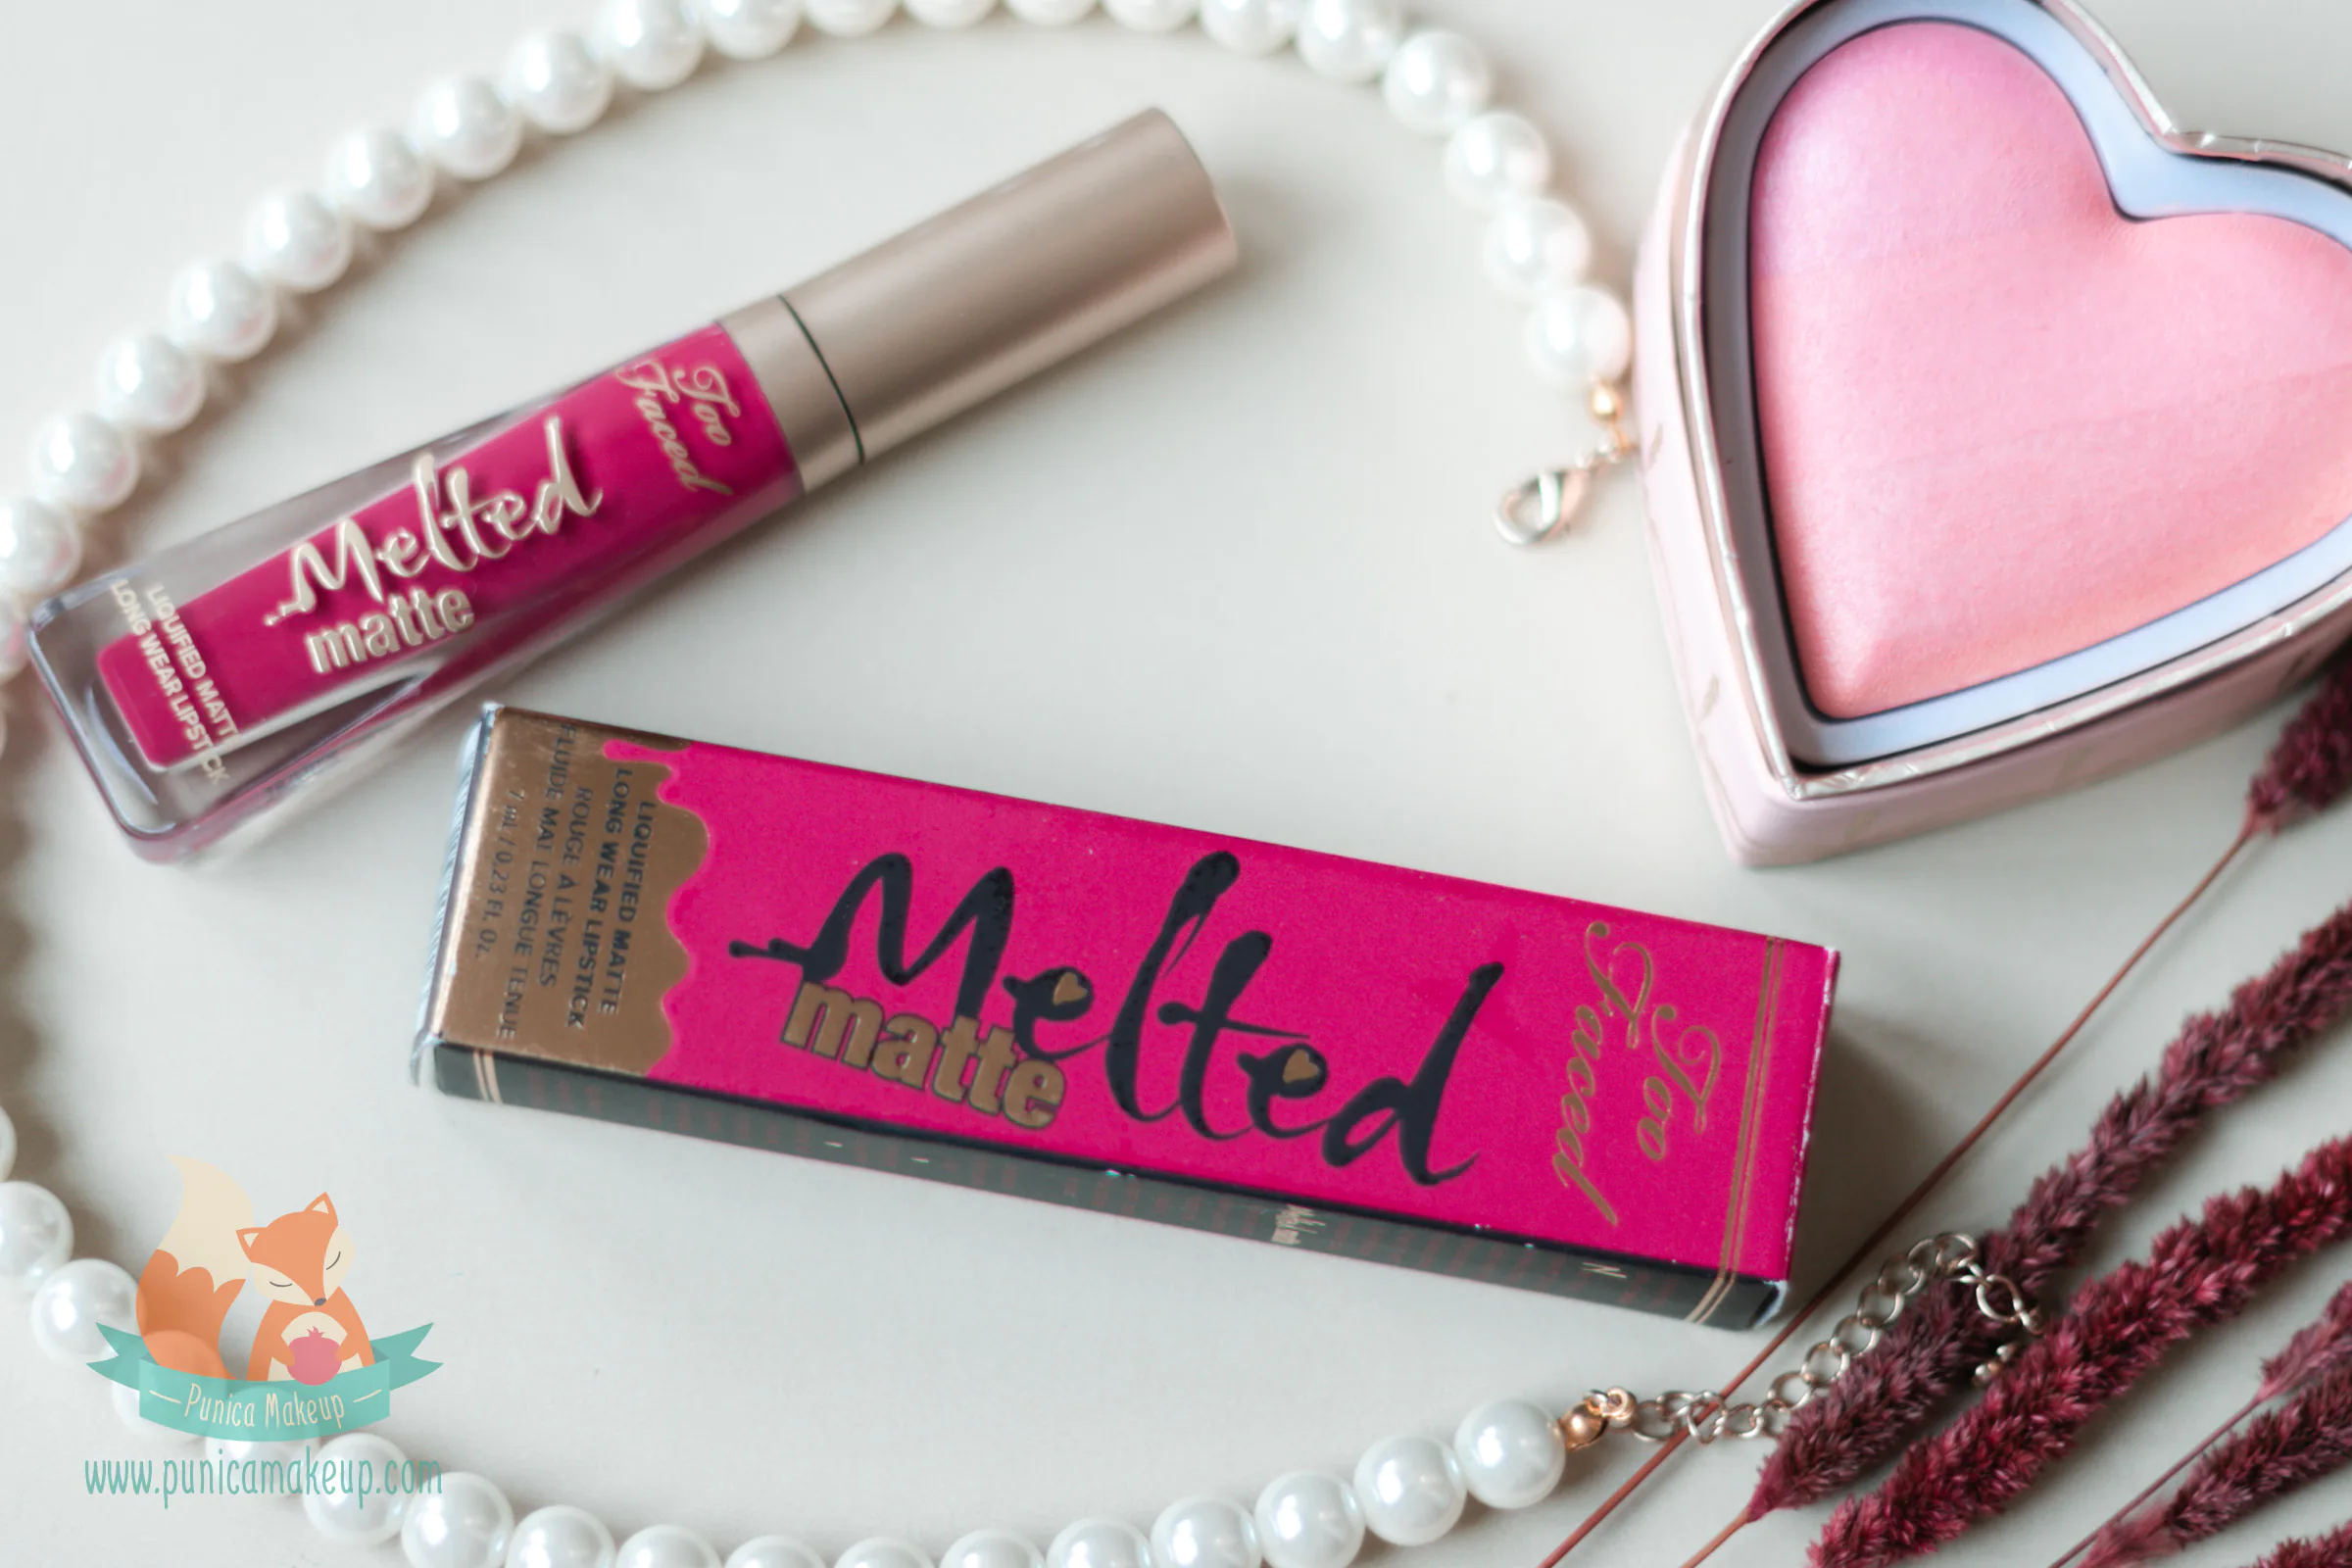 Too Faced Melted Matte Liquified Lipstick Packaging